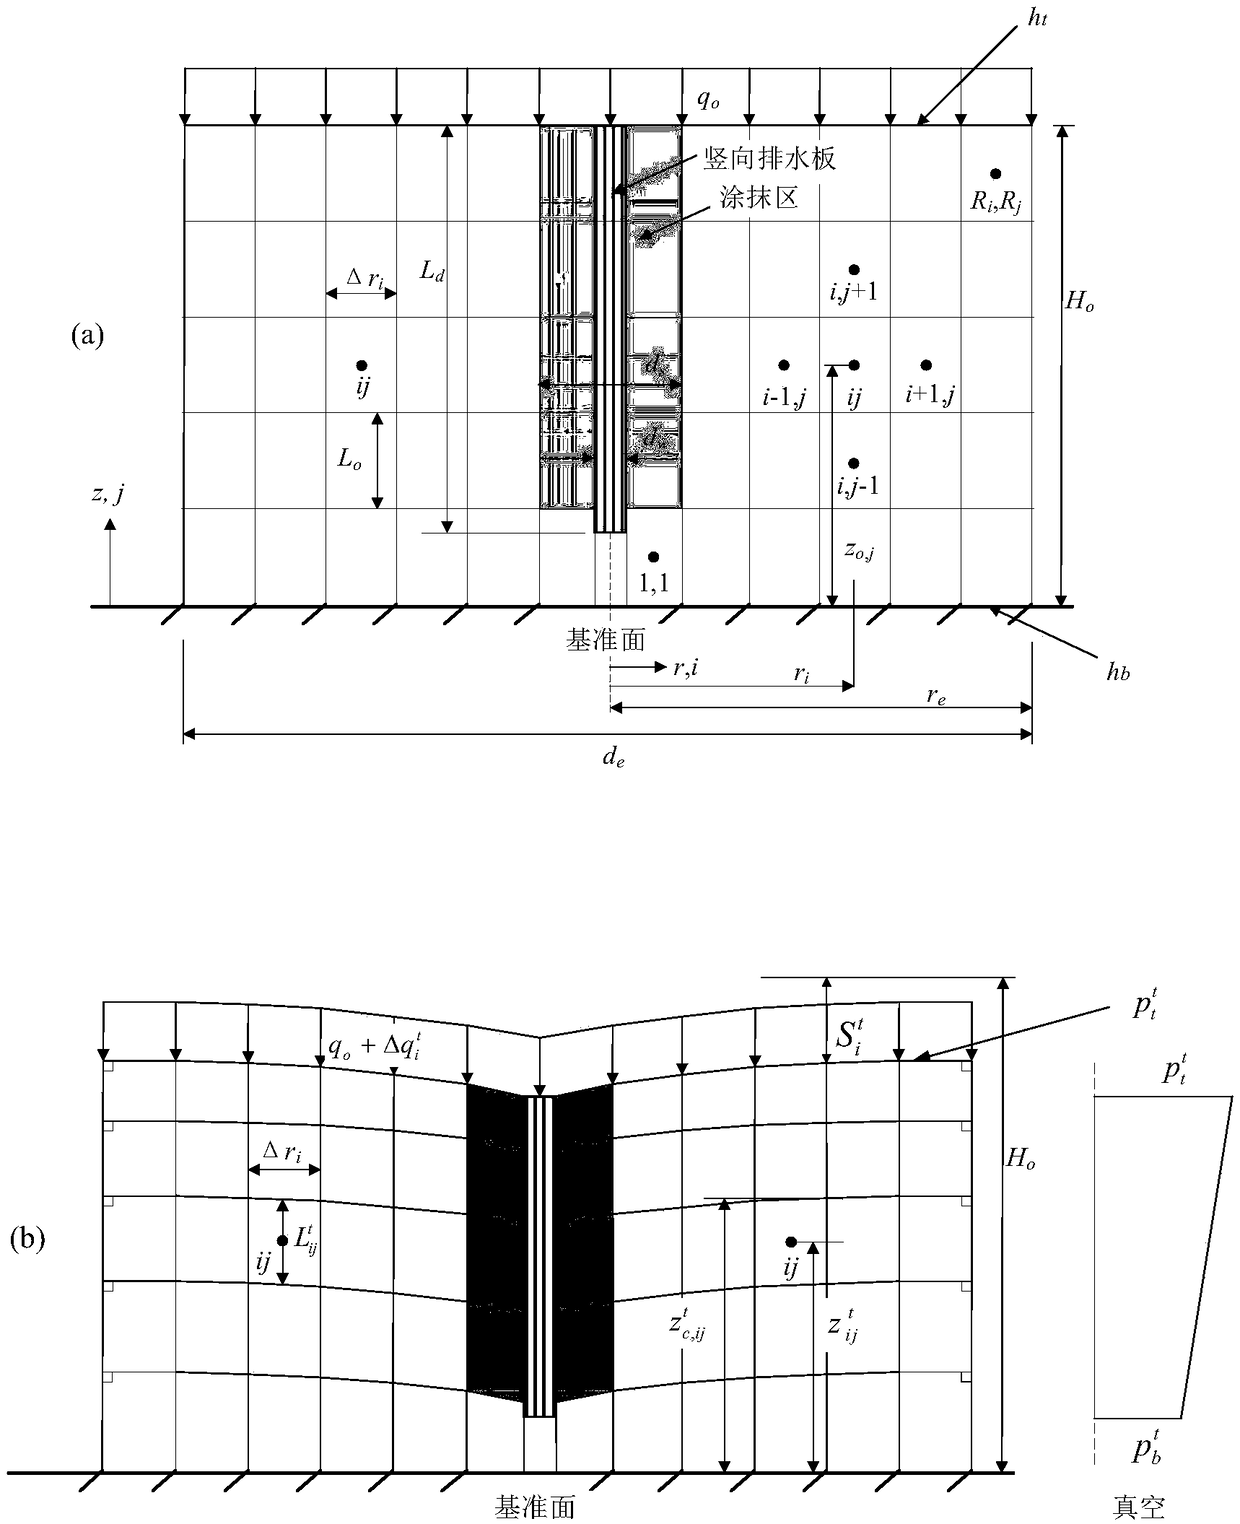 A method for predicting the settlement process of saturated soft soil consolidated by vertical drainage board